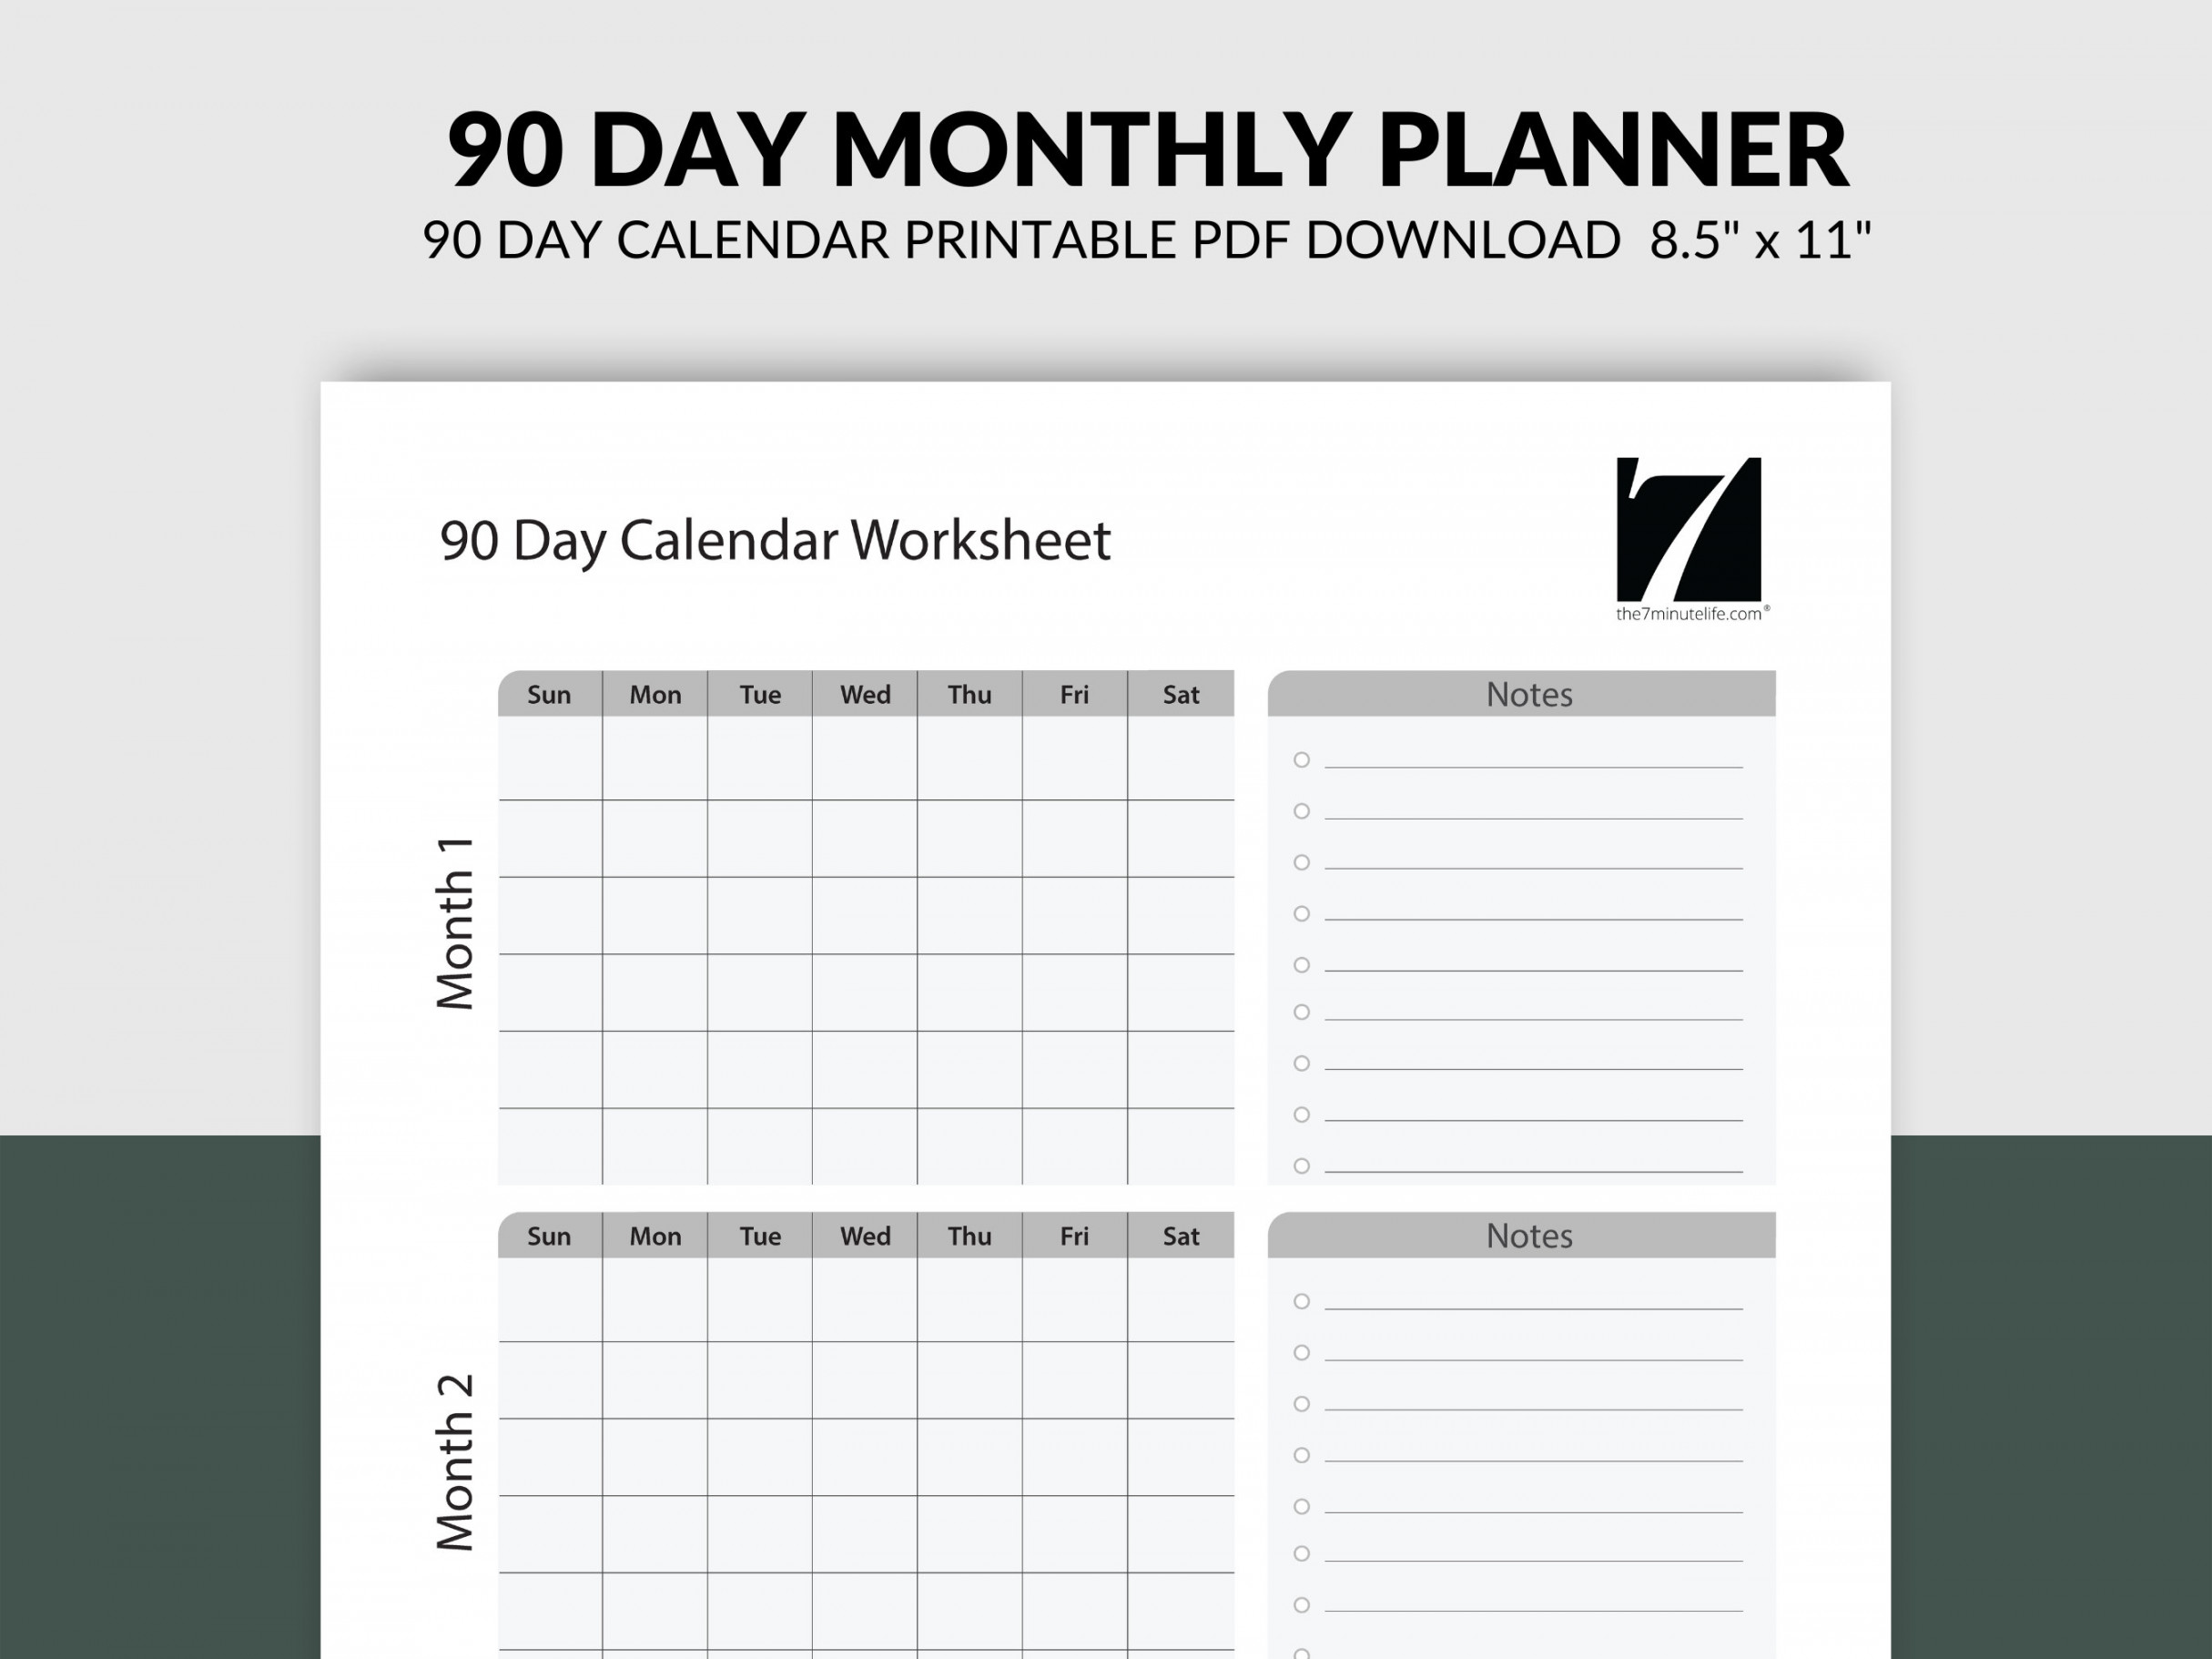 Monthly Planner Printable Day Calendar Undated Month at a